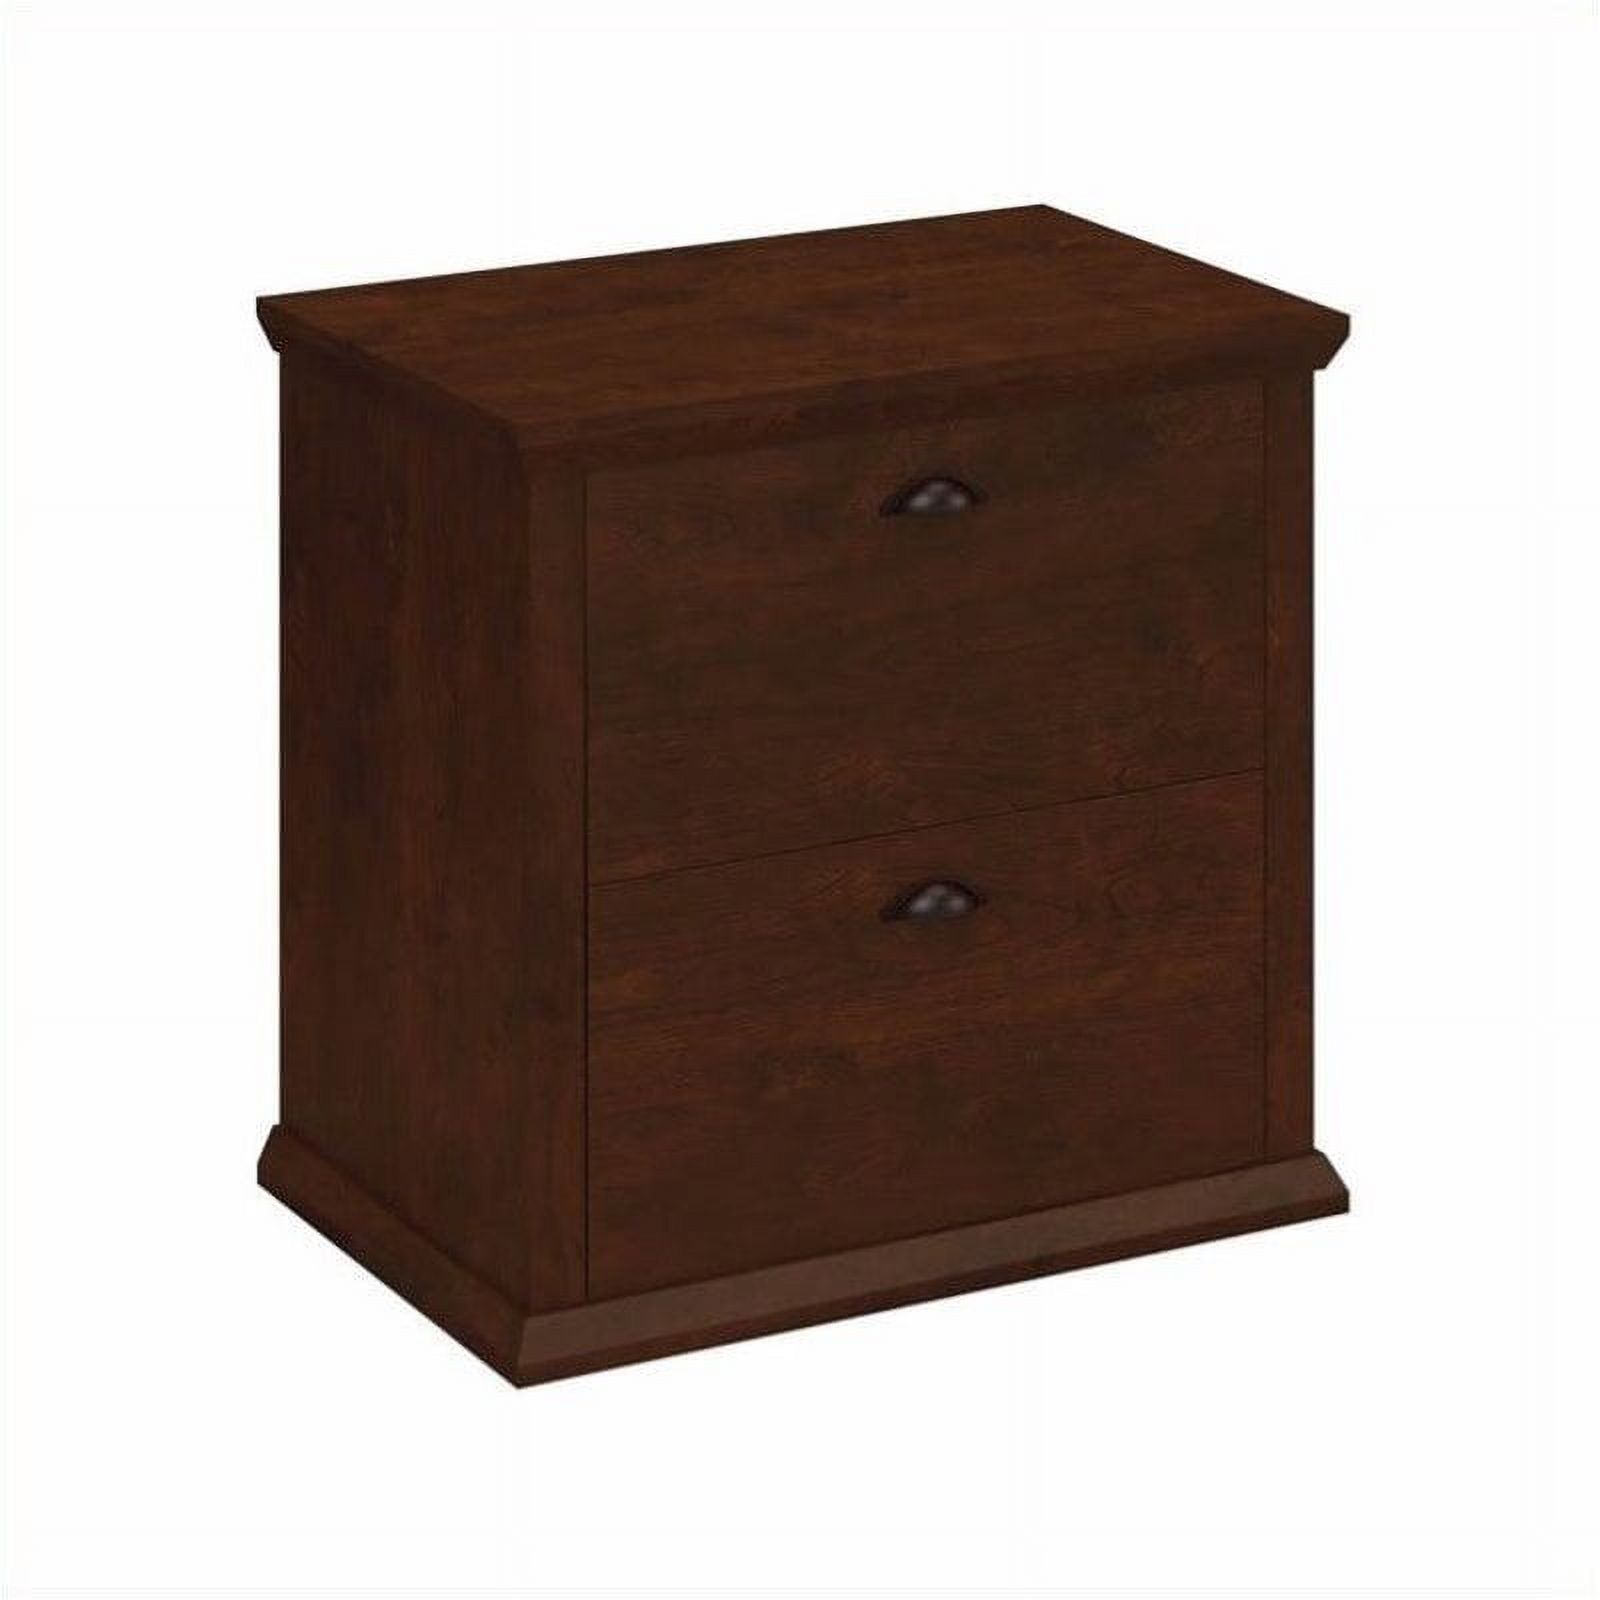 Scranton & Co 2 Drawer Lateral File Cabinet in Antique Cherry - image 1 of 5